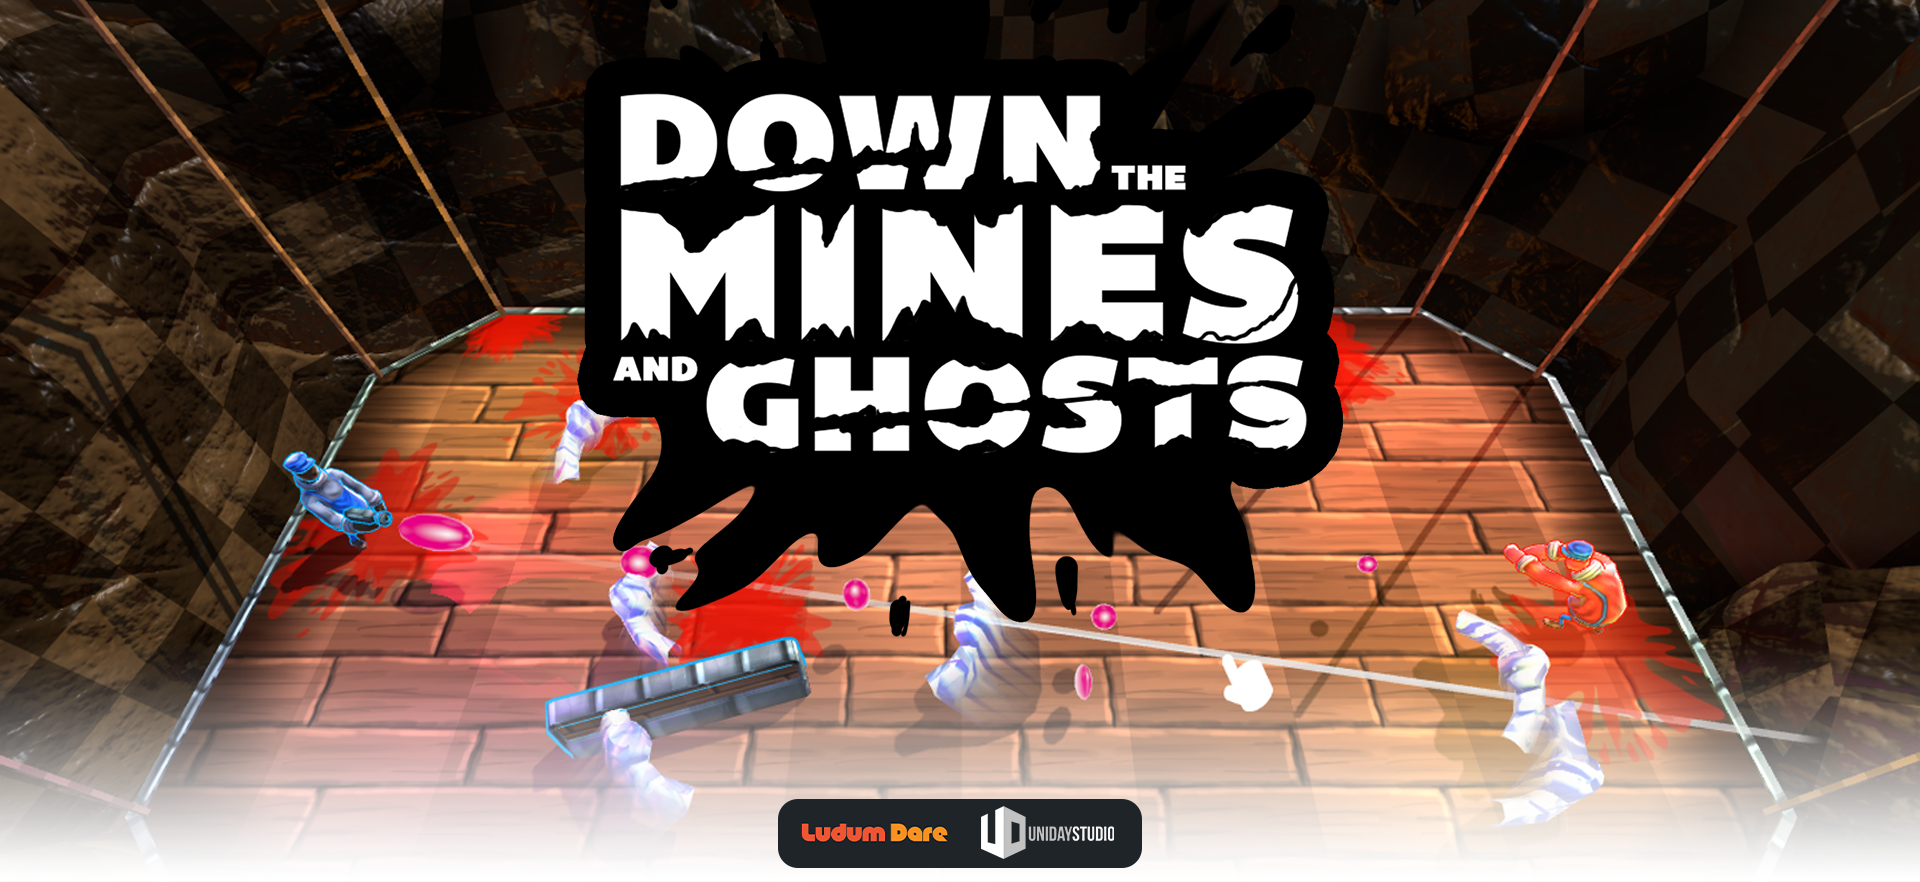 Down the Mines and Ghosts